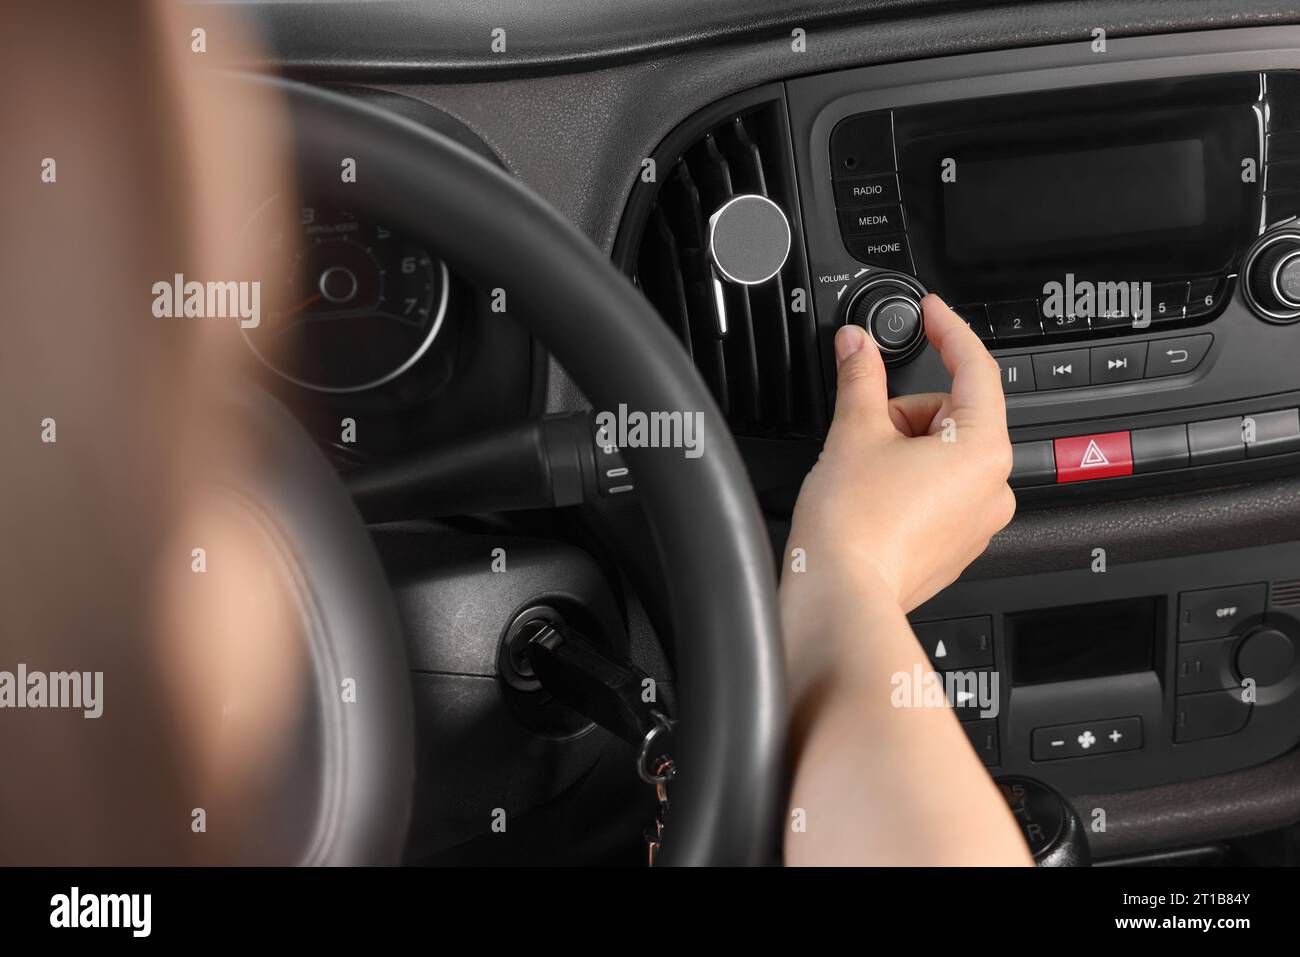 Woman Turning Up The Volume On The Car Radio Stock Photo